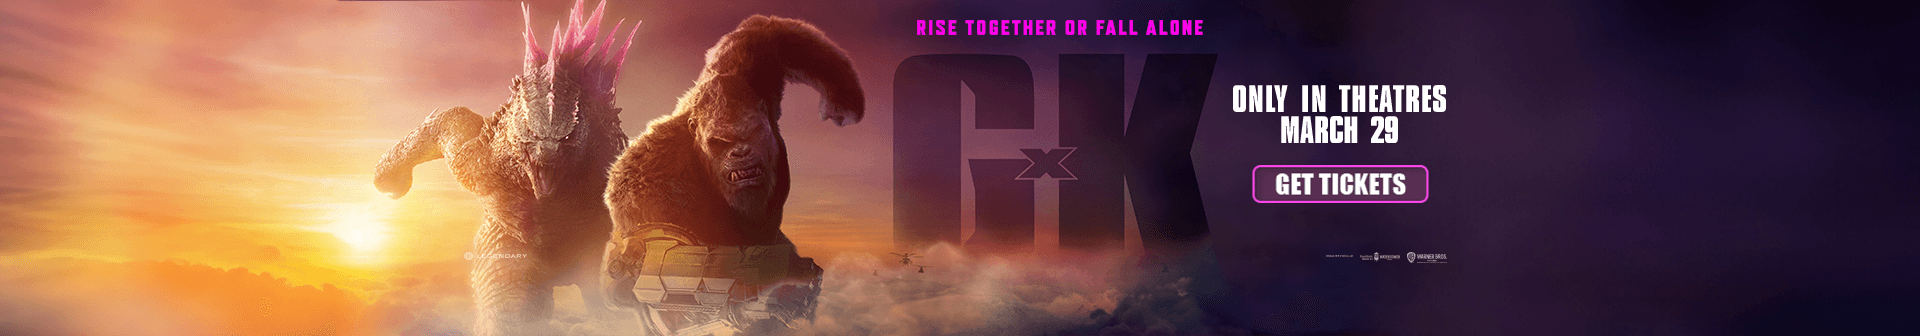 GODZILLA X KONG, in theatres March 29. Get tickets